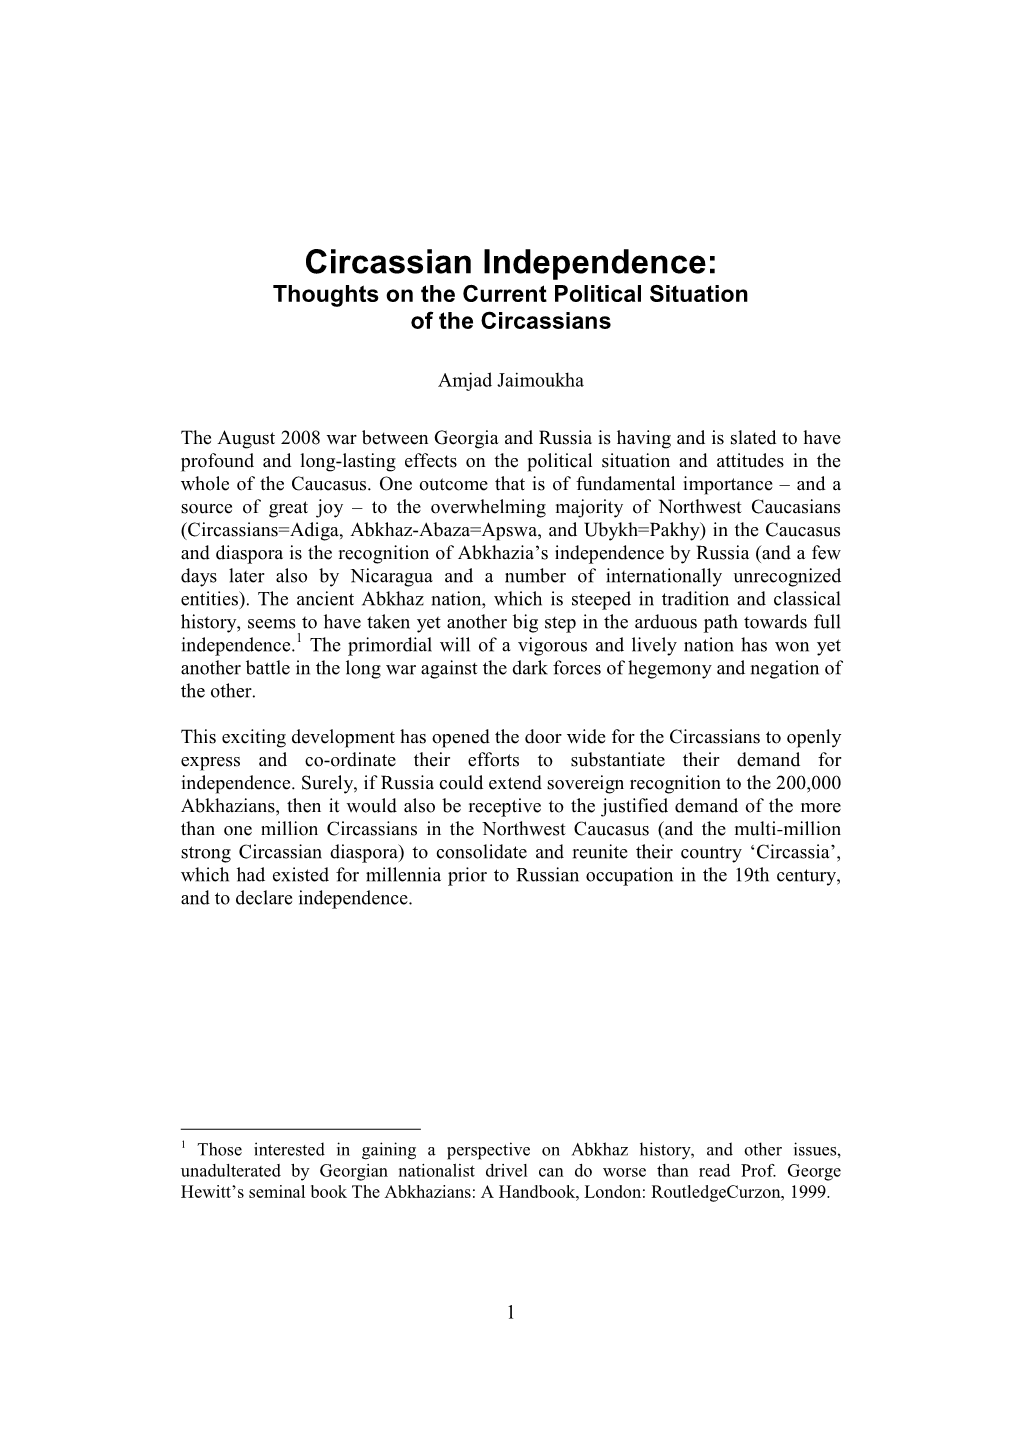 Circassian Independence: Thoughts on the Current Political Situation of the Circassians